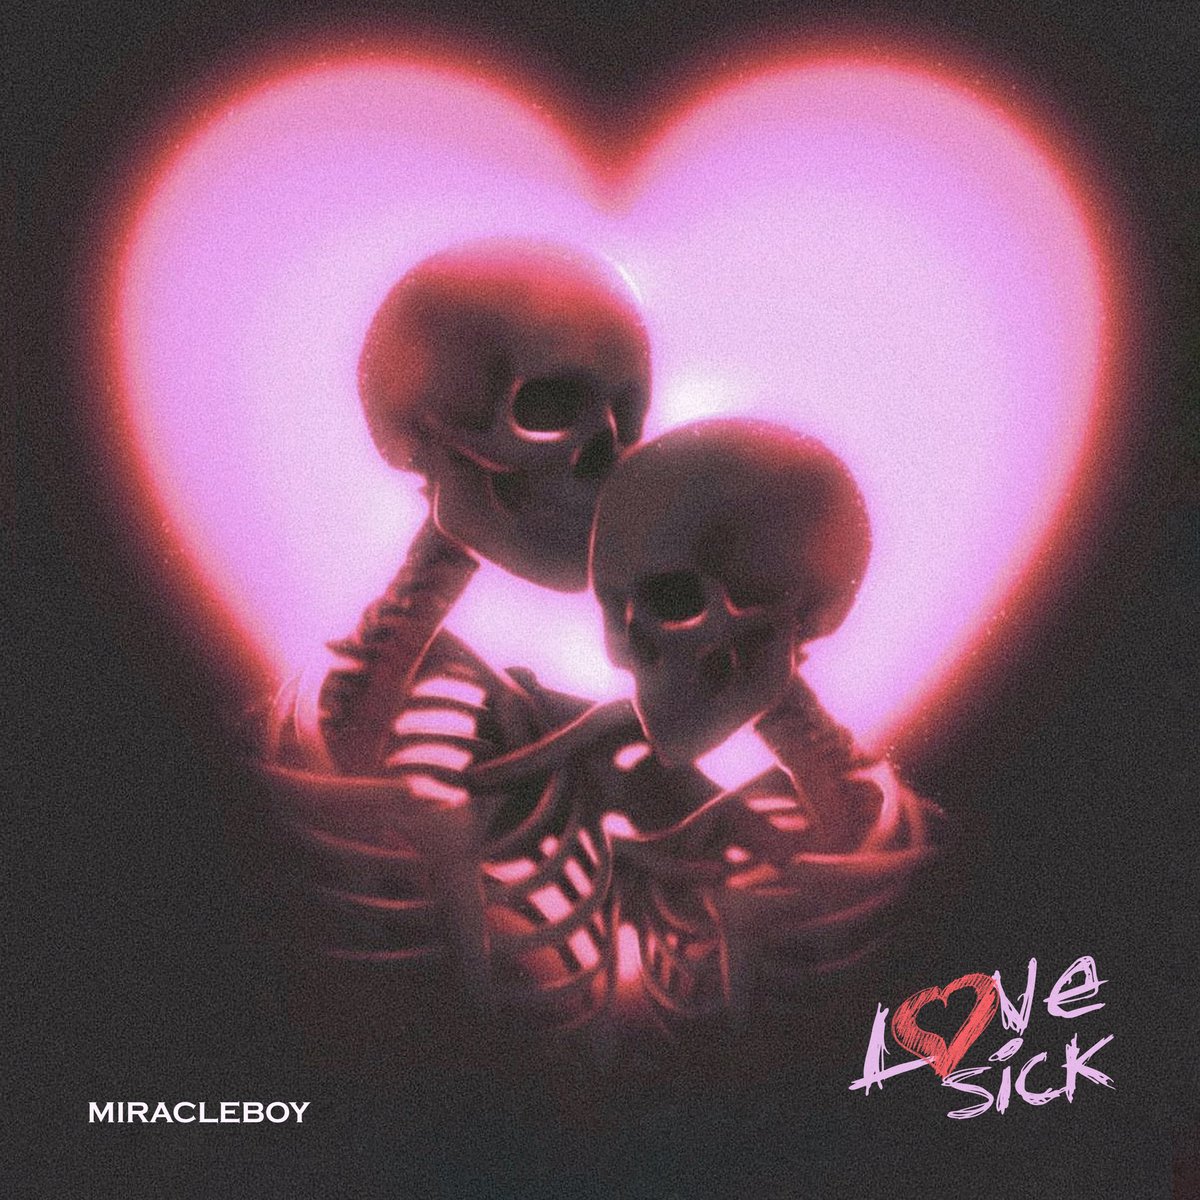 '🎶 Drop everything and tune in! My latest track 'Love Sick' just hit and it's waiting for your ears. Get ready to add some 🔥 to your playlist. Hit the link and let the vibes roll! #NewMusic #ListenNow'

lnk.to/lovesickMB45